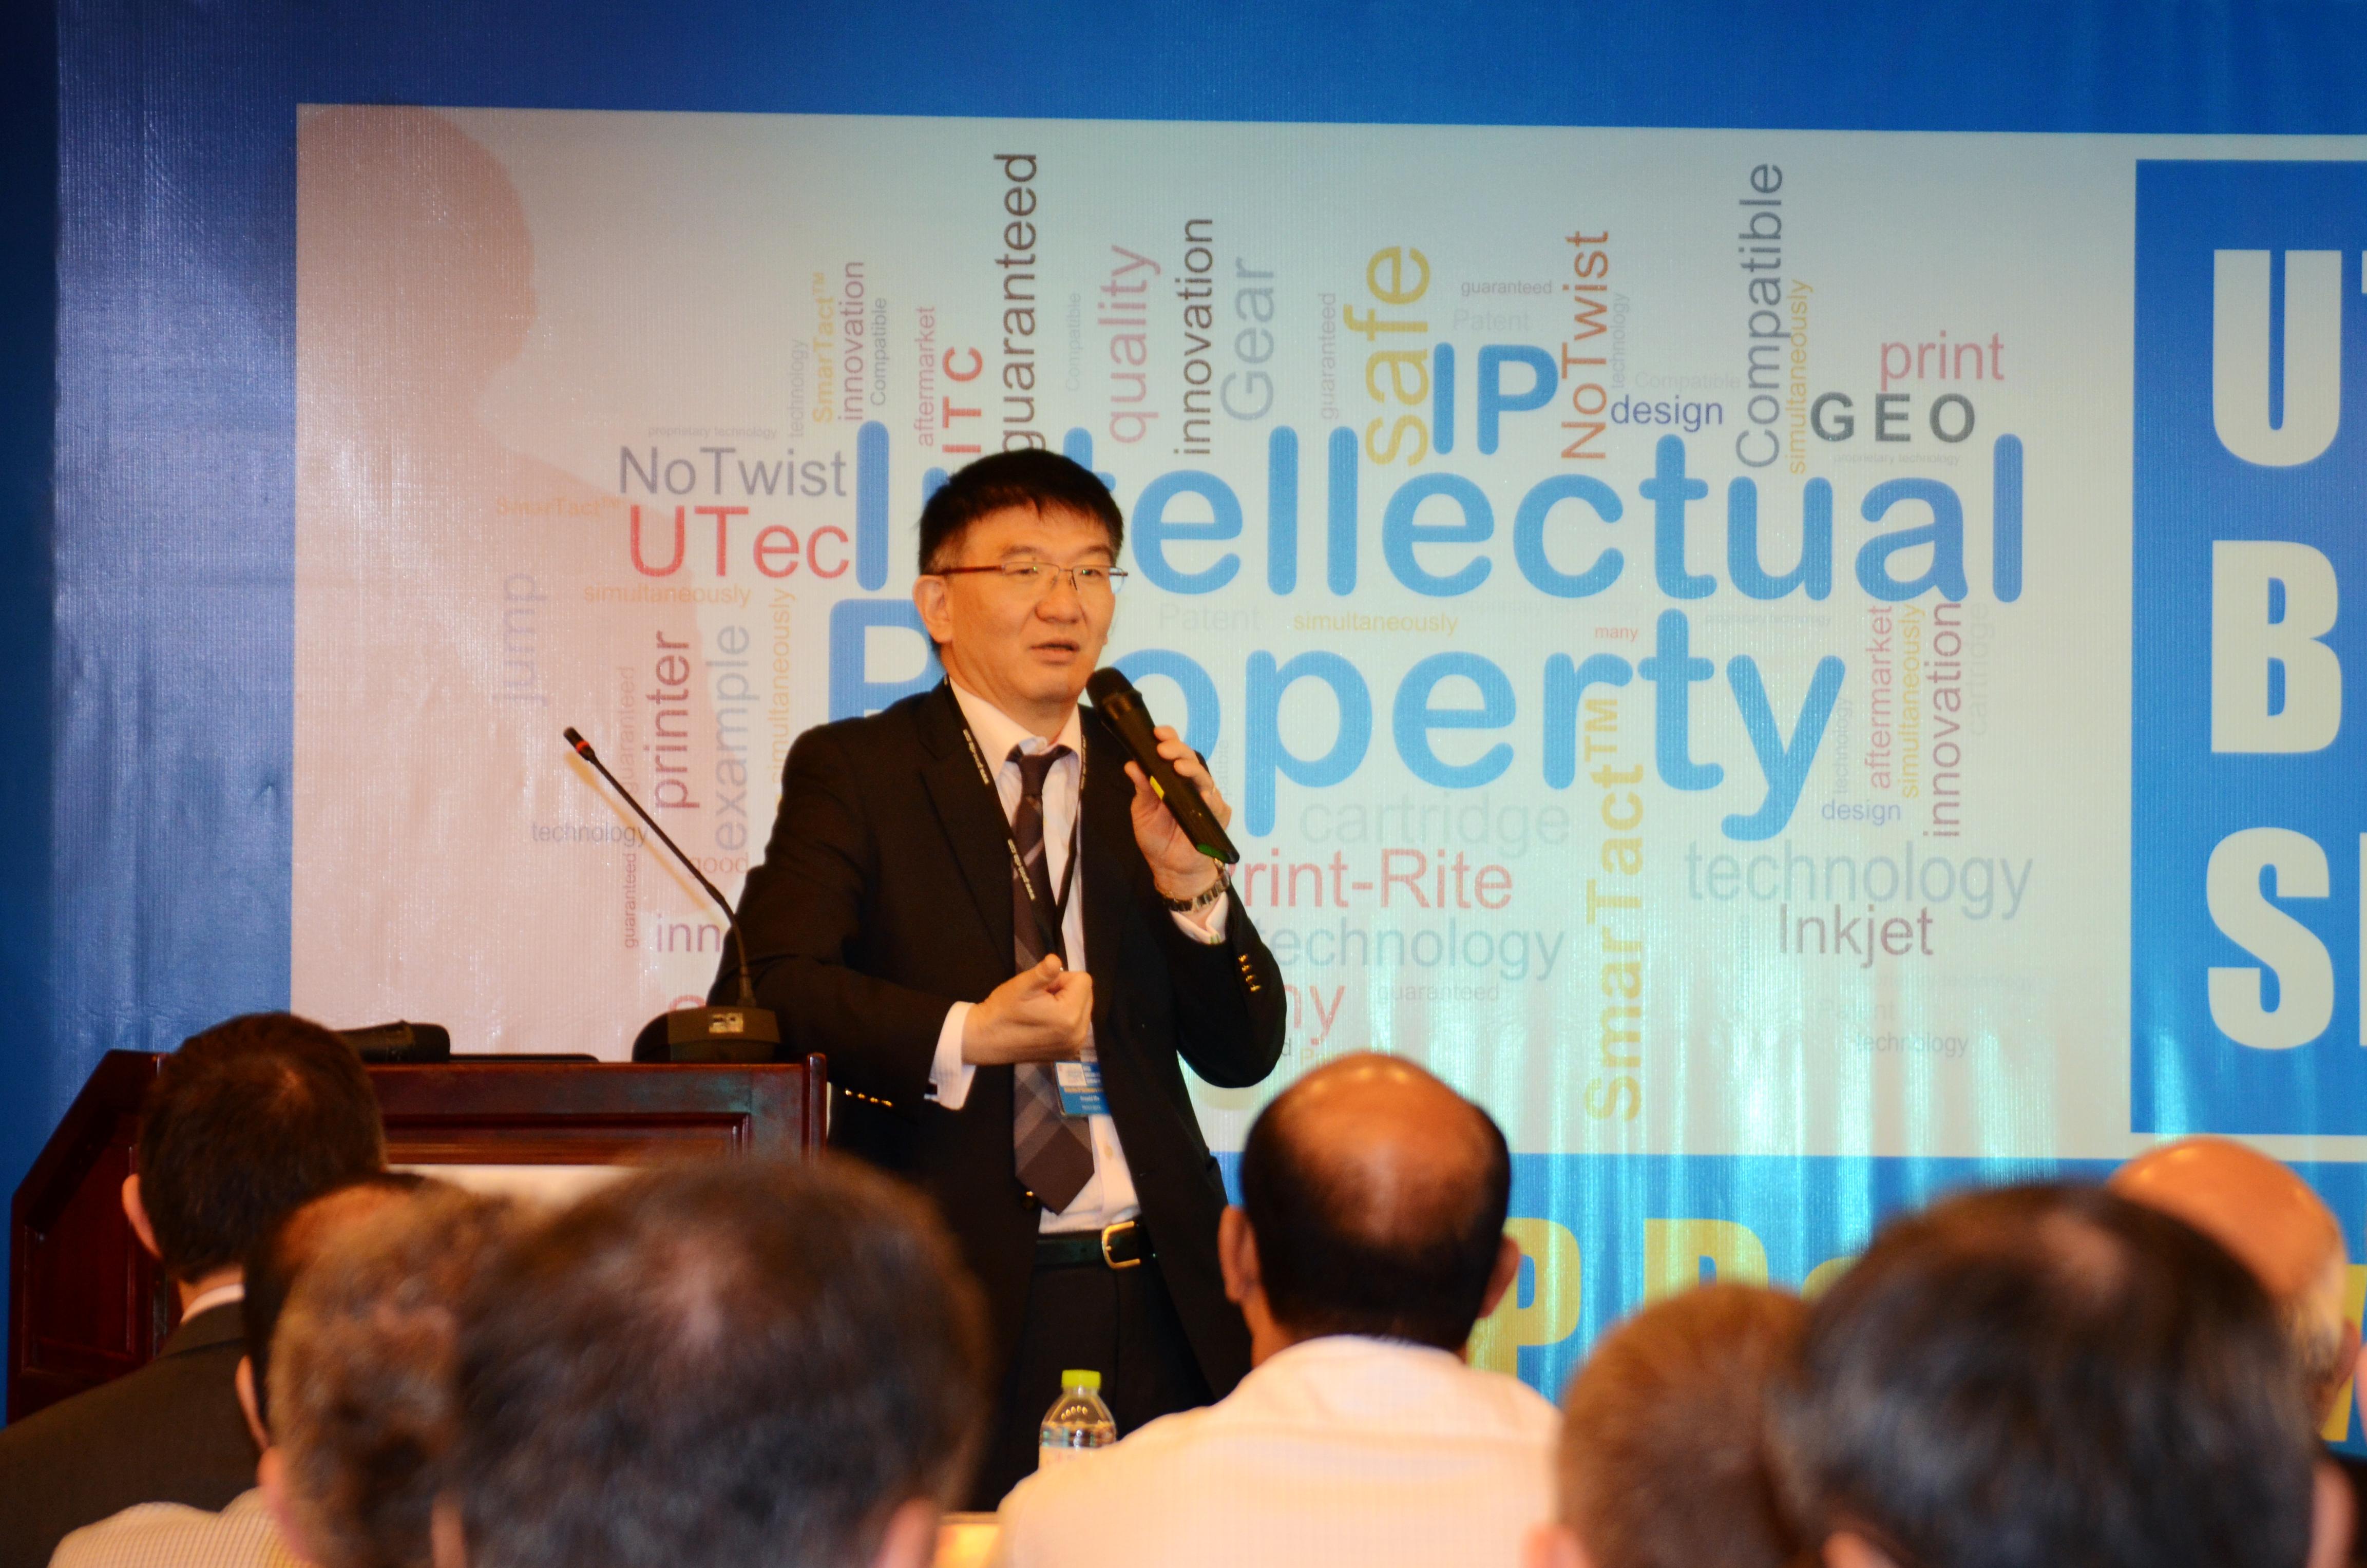 UTec Shares its Insights on Intellectual Property with Visitors of RemaxAsia Expo